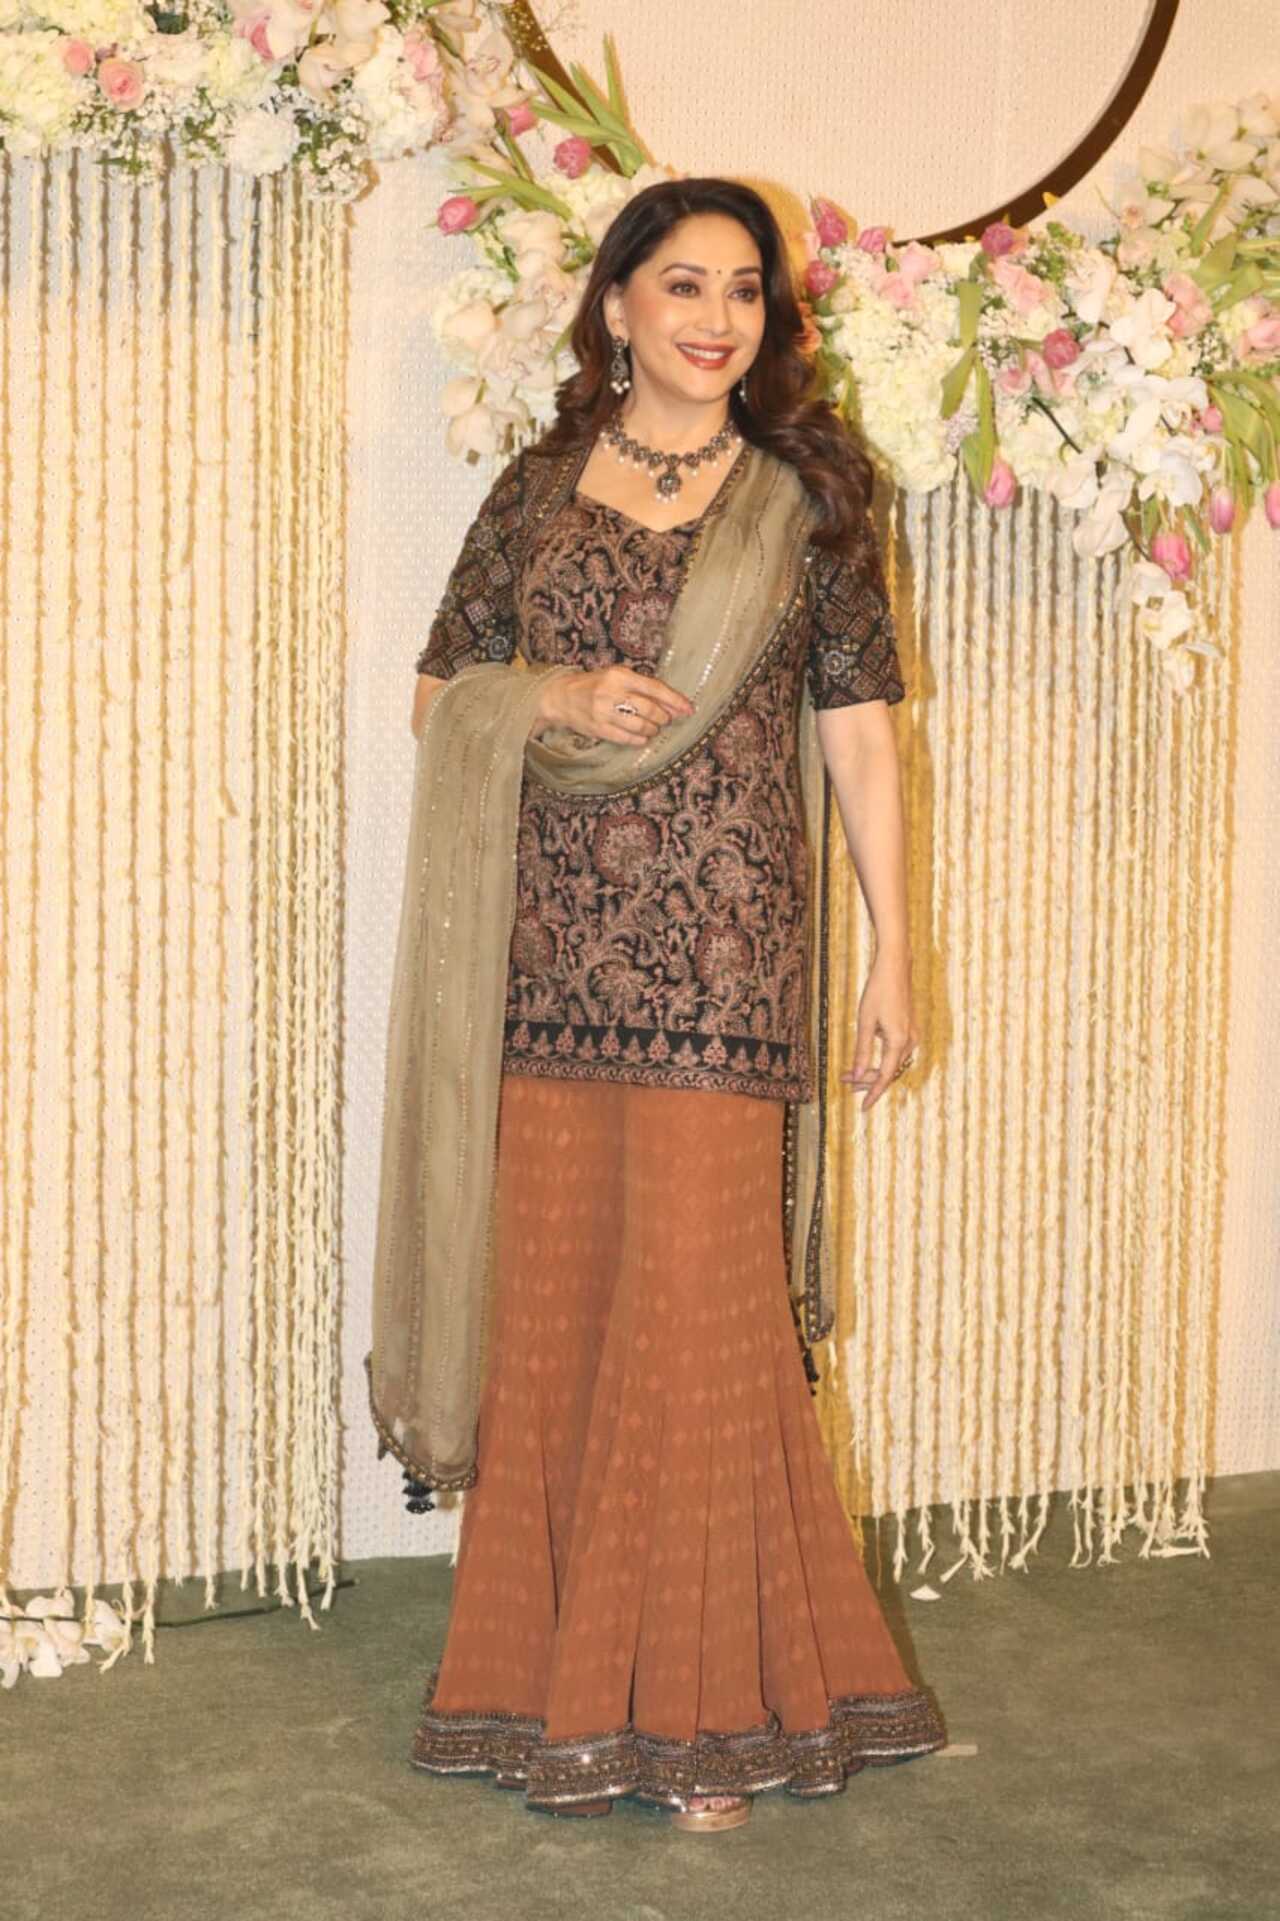 Madhuri Dixit went for a sharara suit of shades of brown